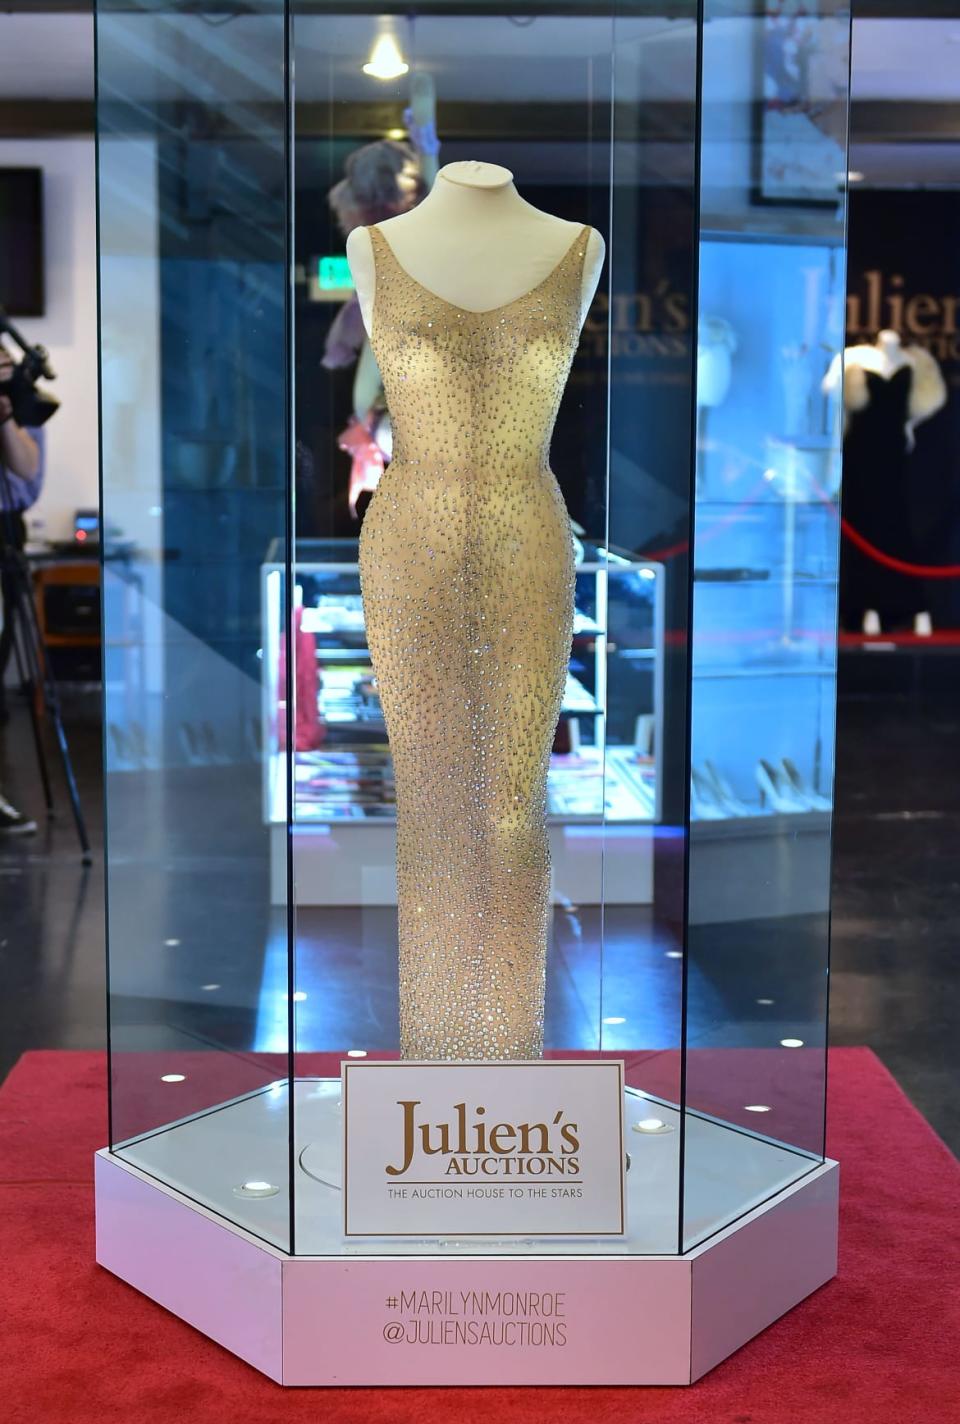 <div class="inline-image__caption"><p>The dress worn by Marilyn Monroe when she sang "Happy Birthday Mr. President" to US President John F. Kennedy in May 1962, is displayed in a glass enclosure at Julien's Auction House in Los Angeles, California on November 17, 2016, ahead of its auction.</p></div> <div class="inline-image__credit">FREDERIC J. BROWN/AFP via Getty Images</div>